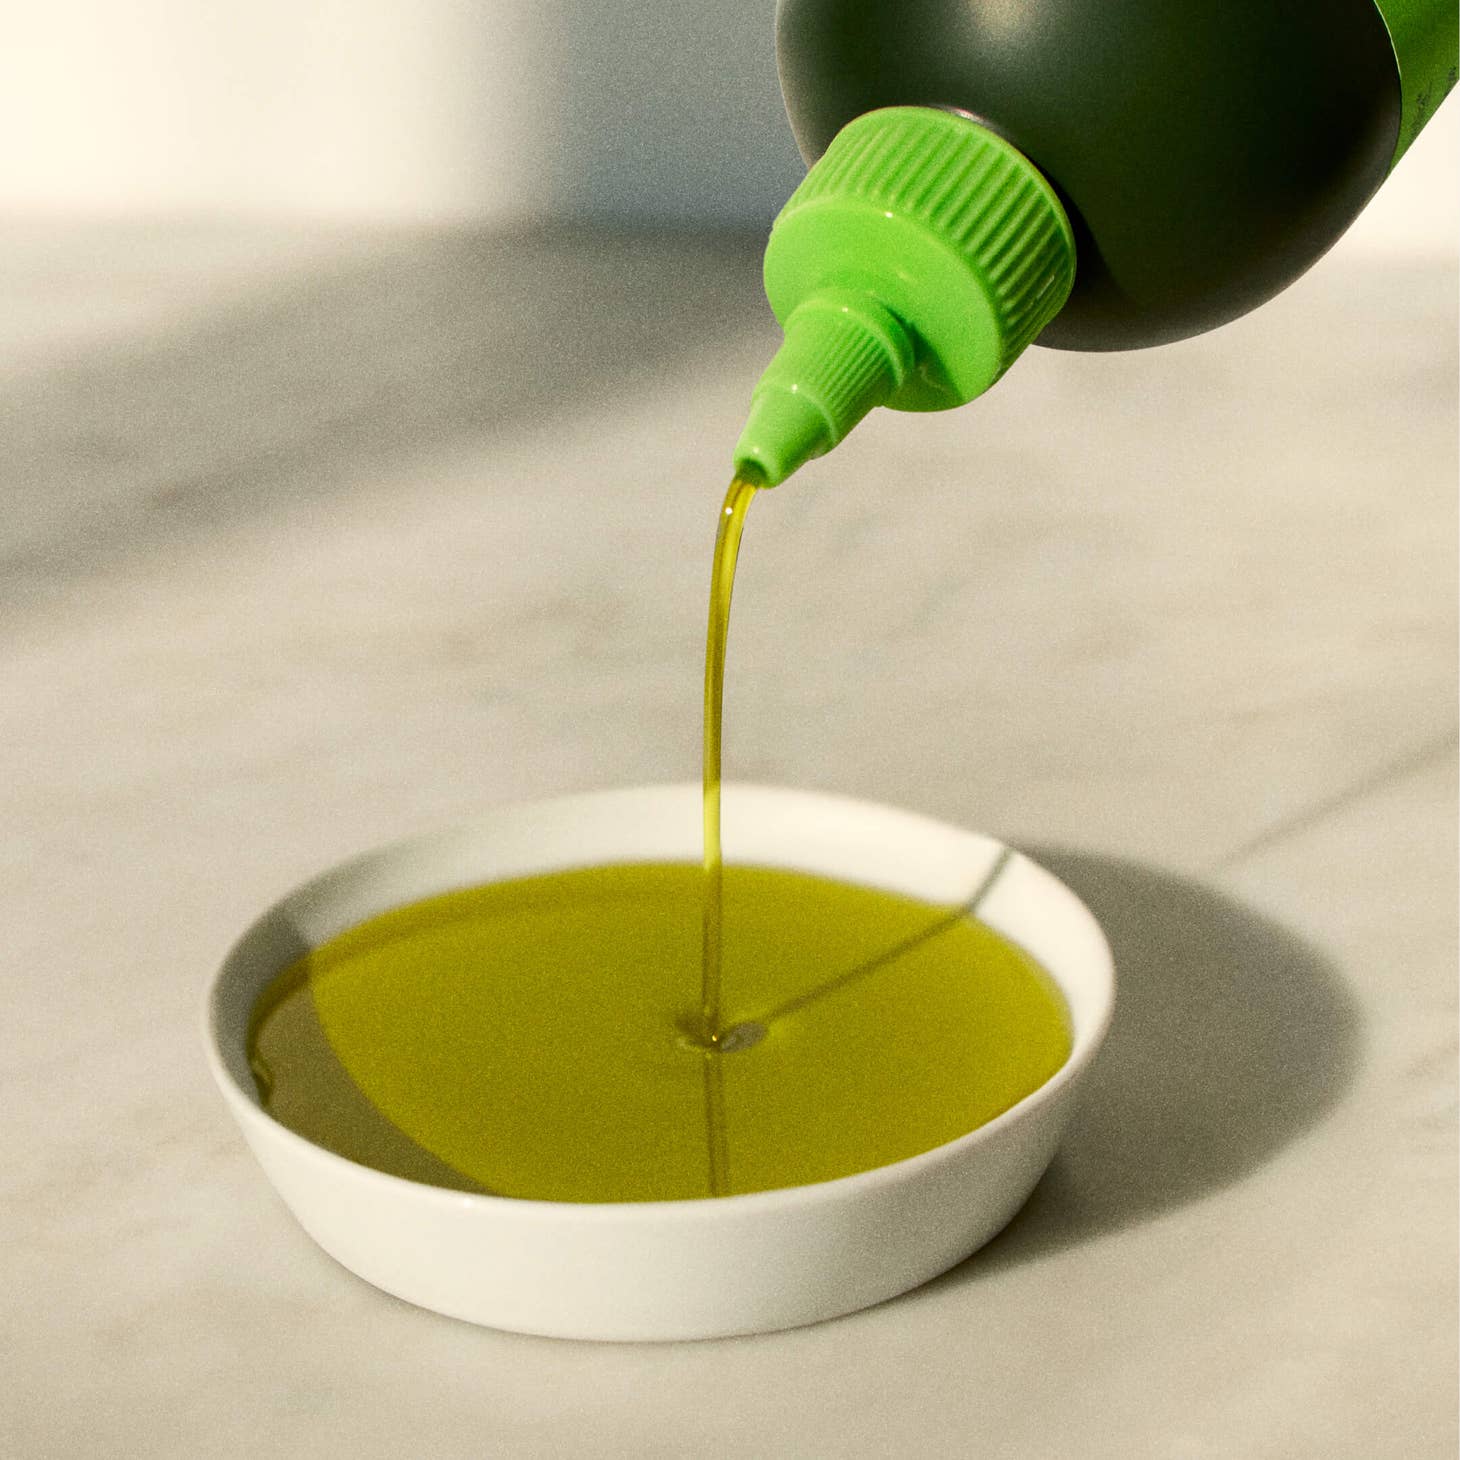 Extra Virgin Olive Oil, Drizzle